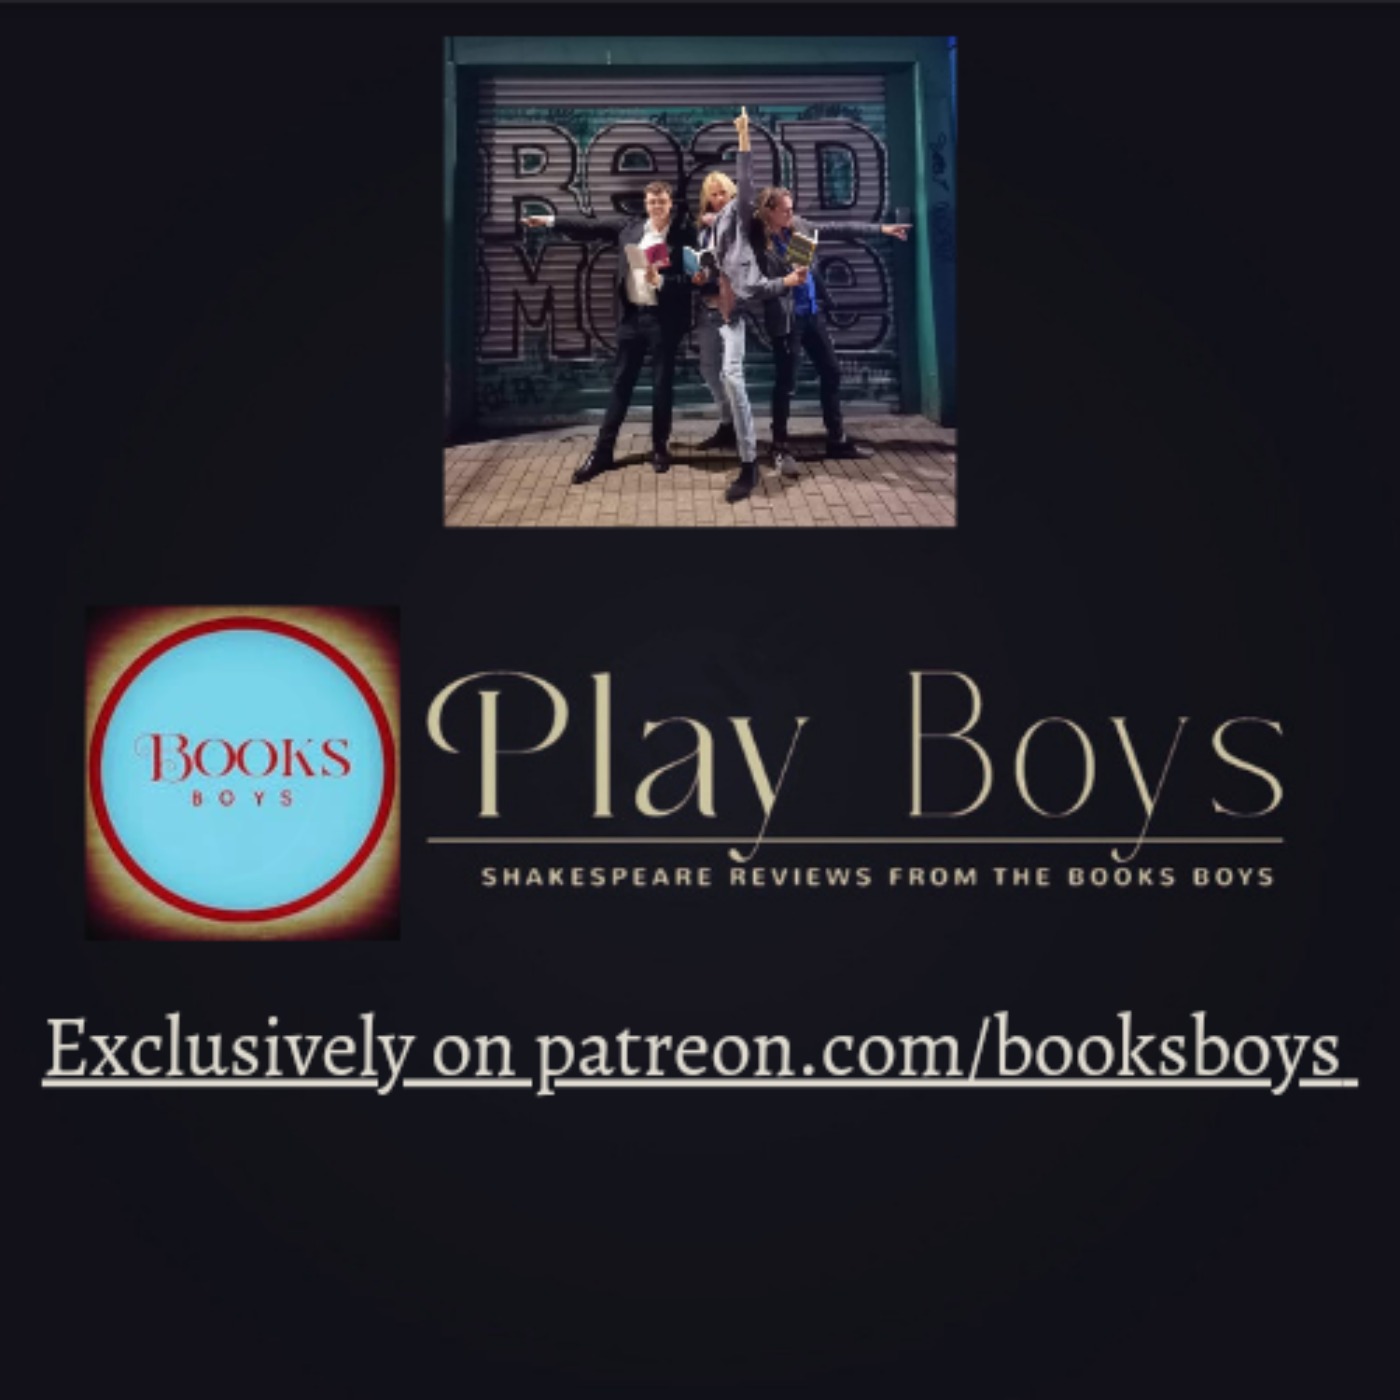 PlayBoys Episode 3: Comedy of Errors